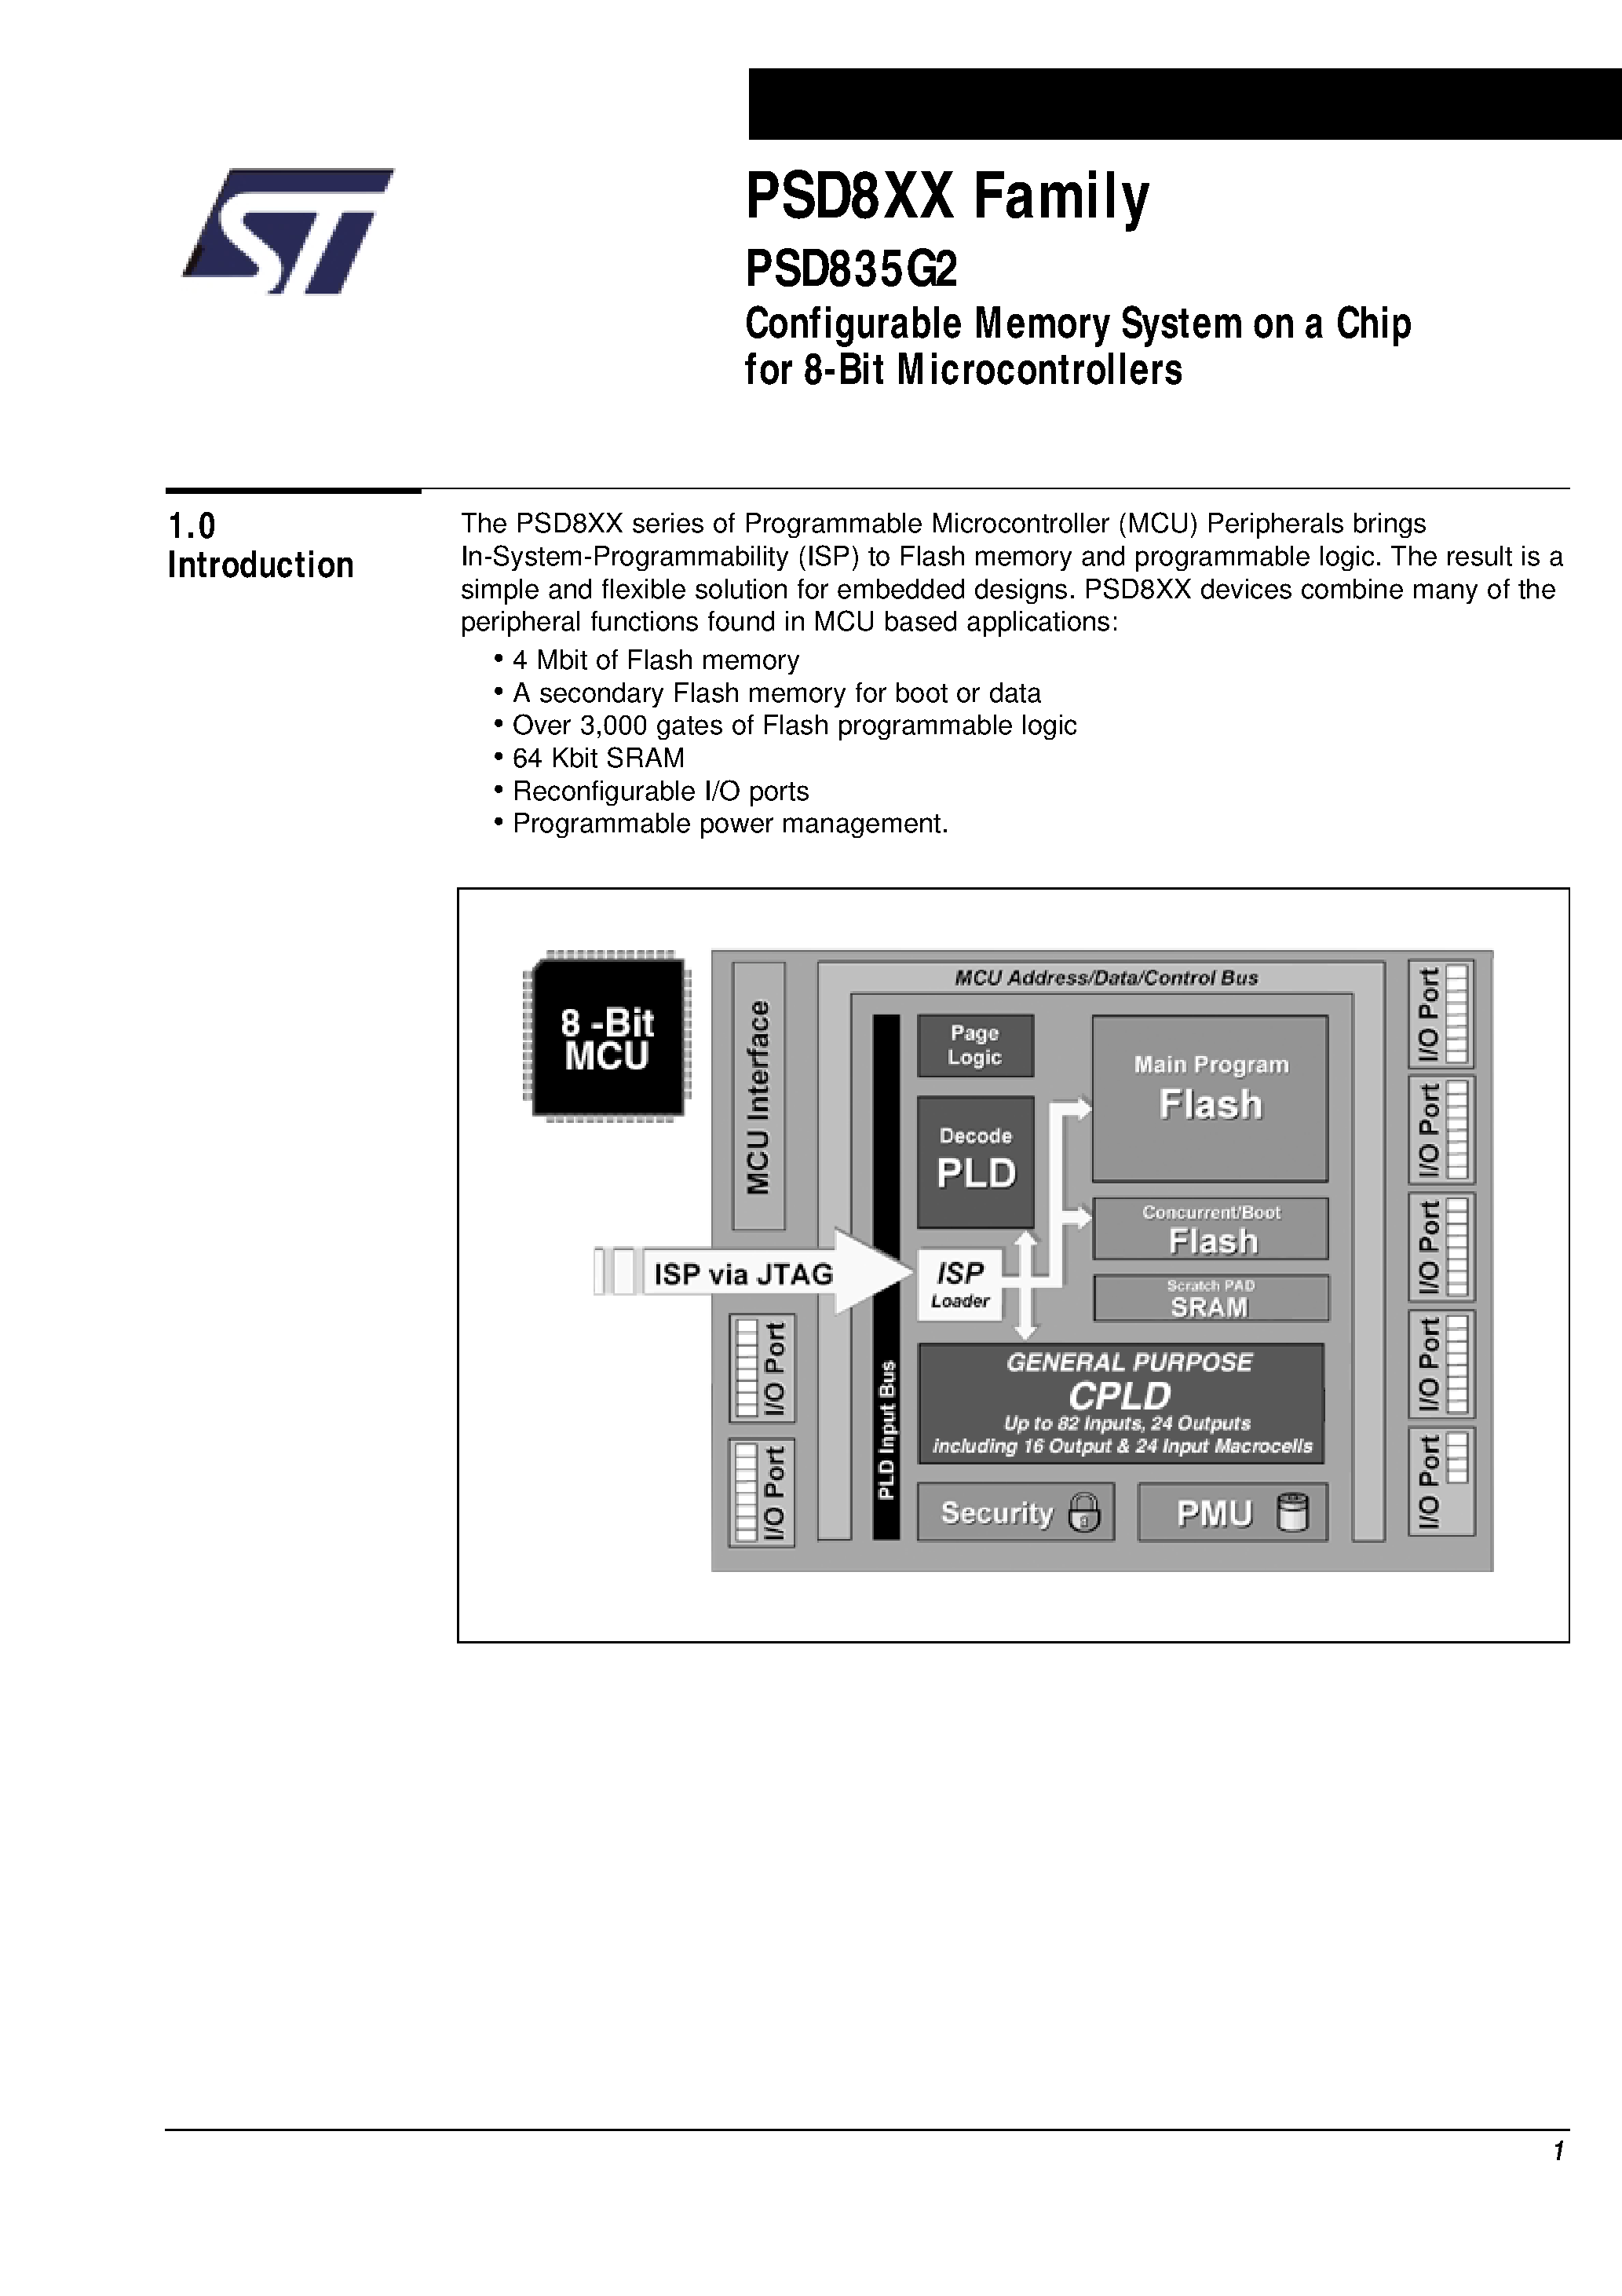 Datasheet PSD835F1V-A-20JI - Configurable Memory System on a Chip for 8-Bit Microcontrollers page 2